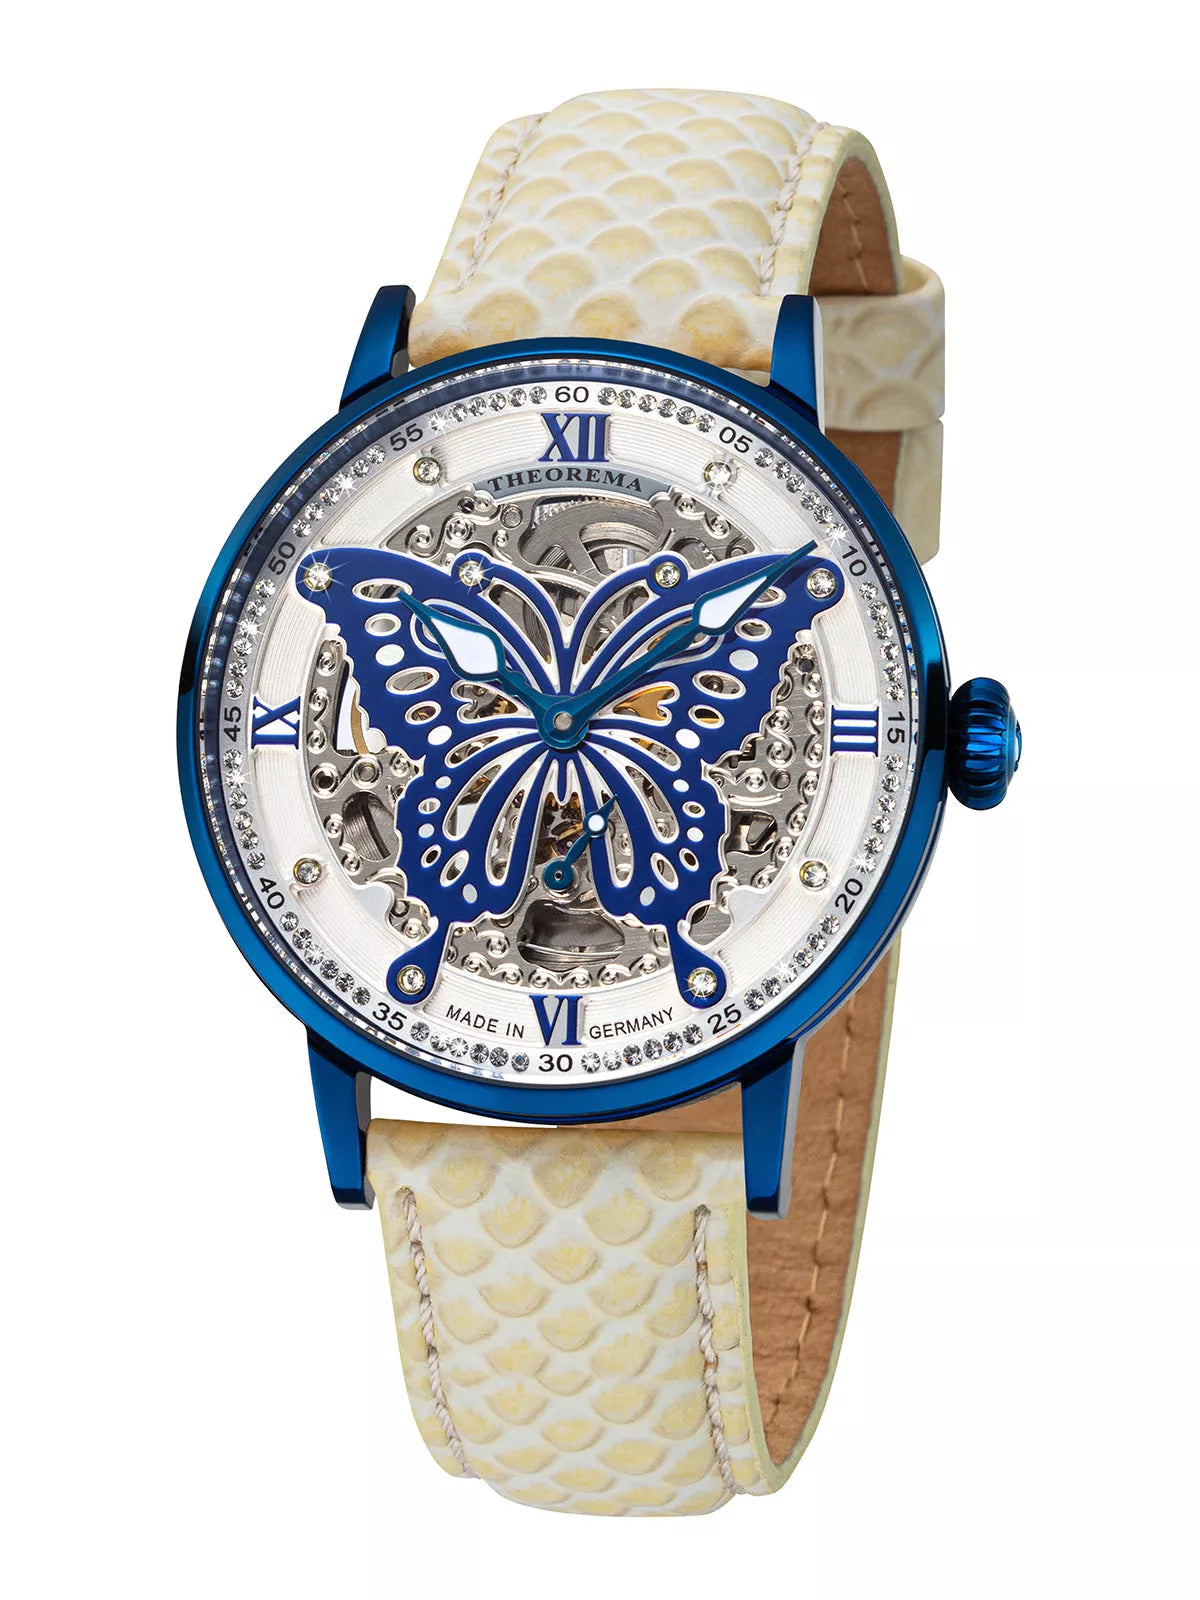 Big butterfly design on the dial with 82 Swarovski crystals on the bezel.